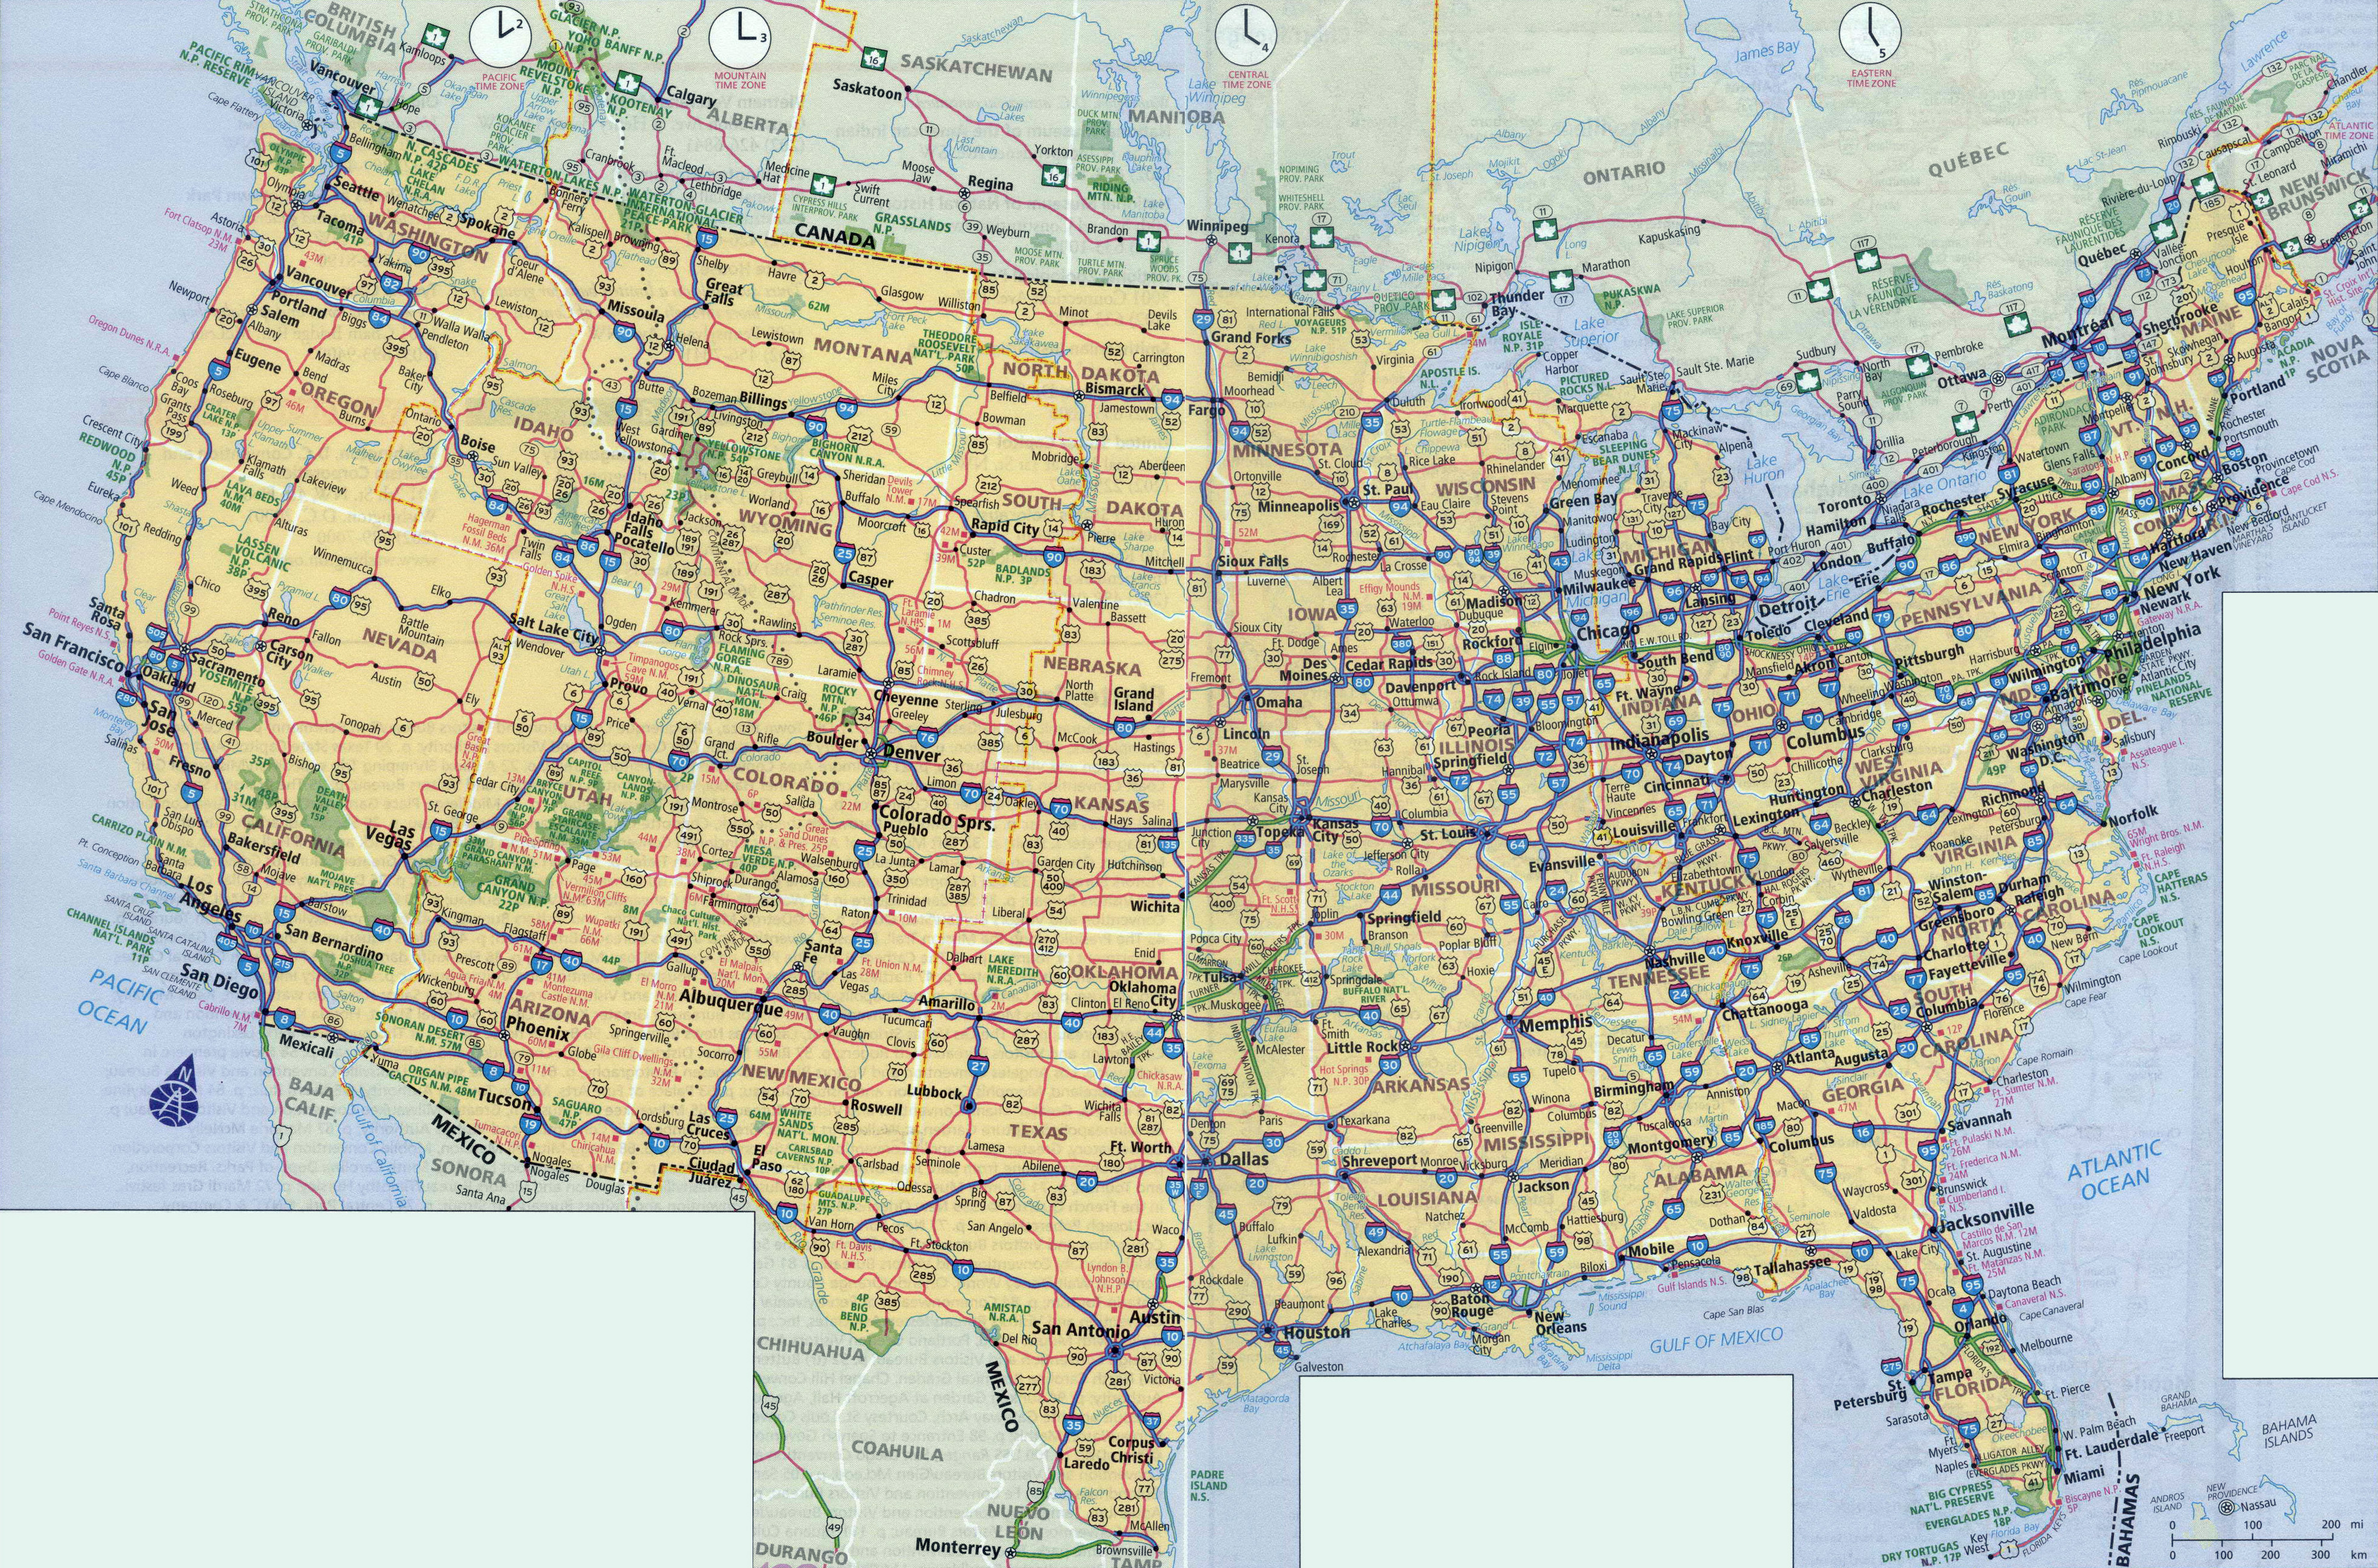 Scale Map Of Usa Large scale highways map of the USA | USA | Maps of the USA | Maps 